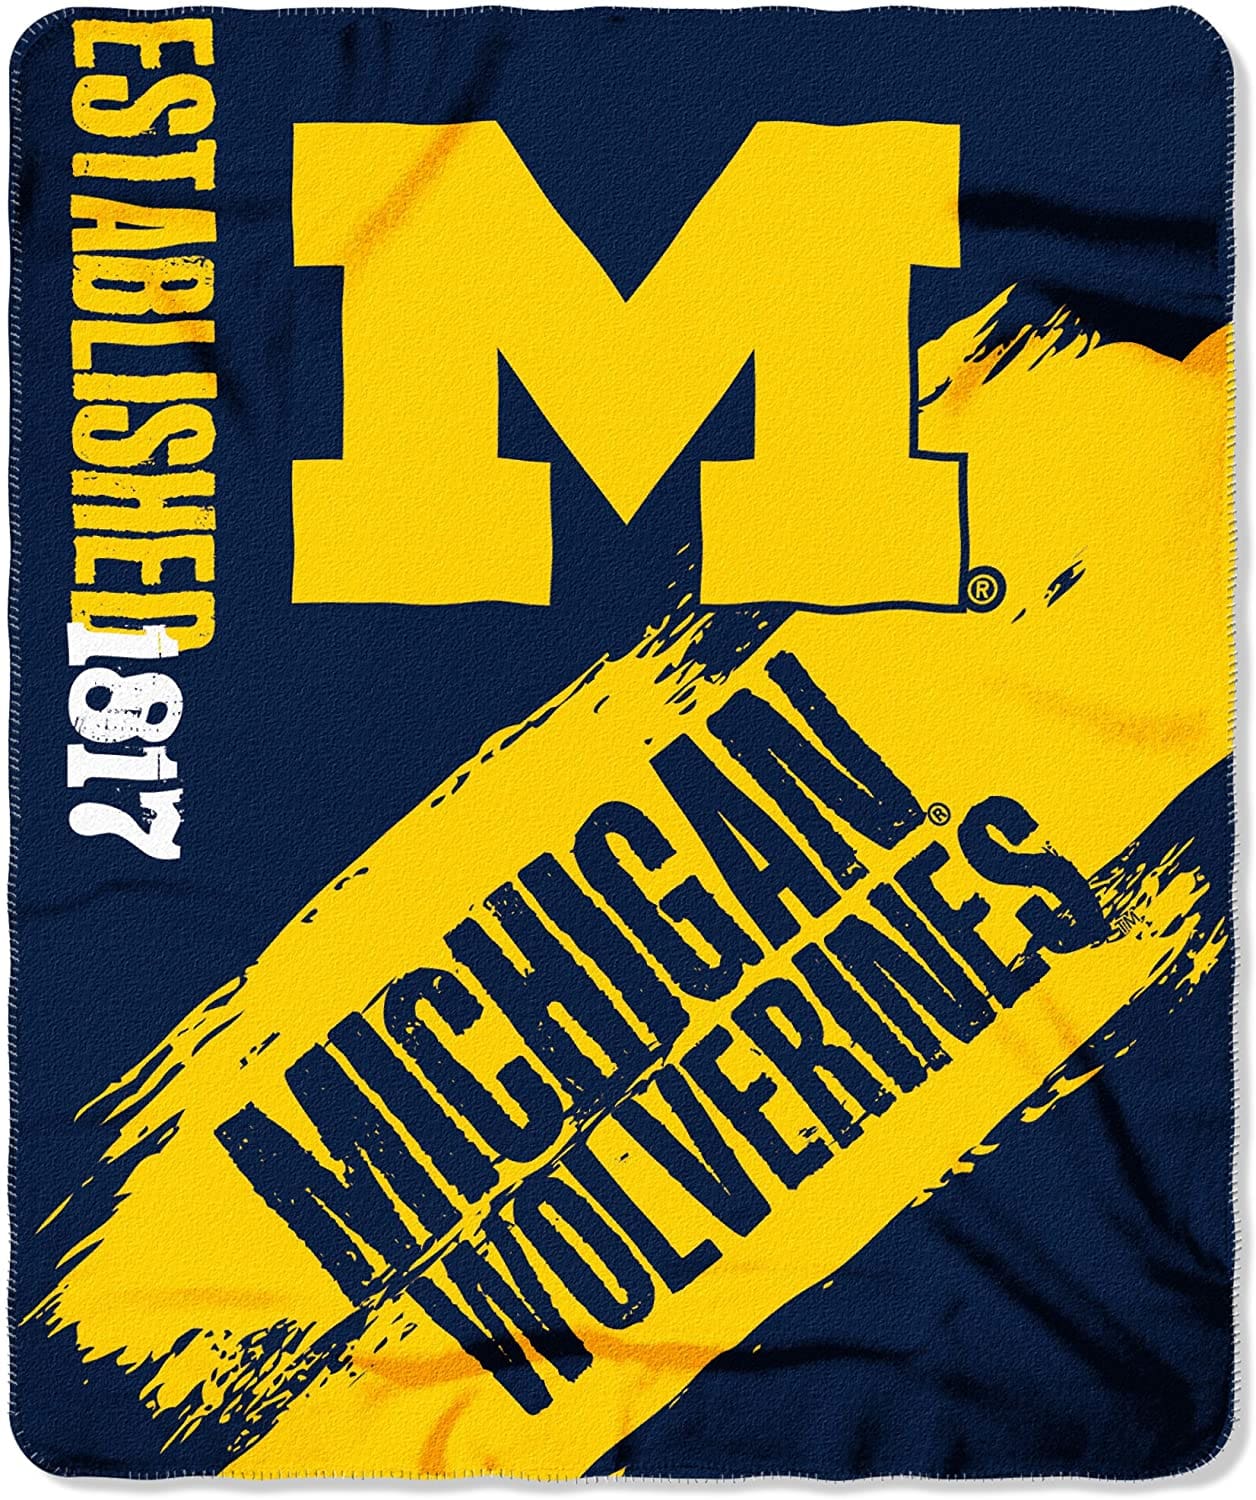 Officially Licensed Ncaa Printed Throw Michigan Wolverines Fleece Blanket